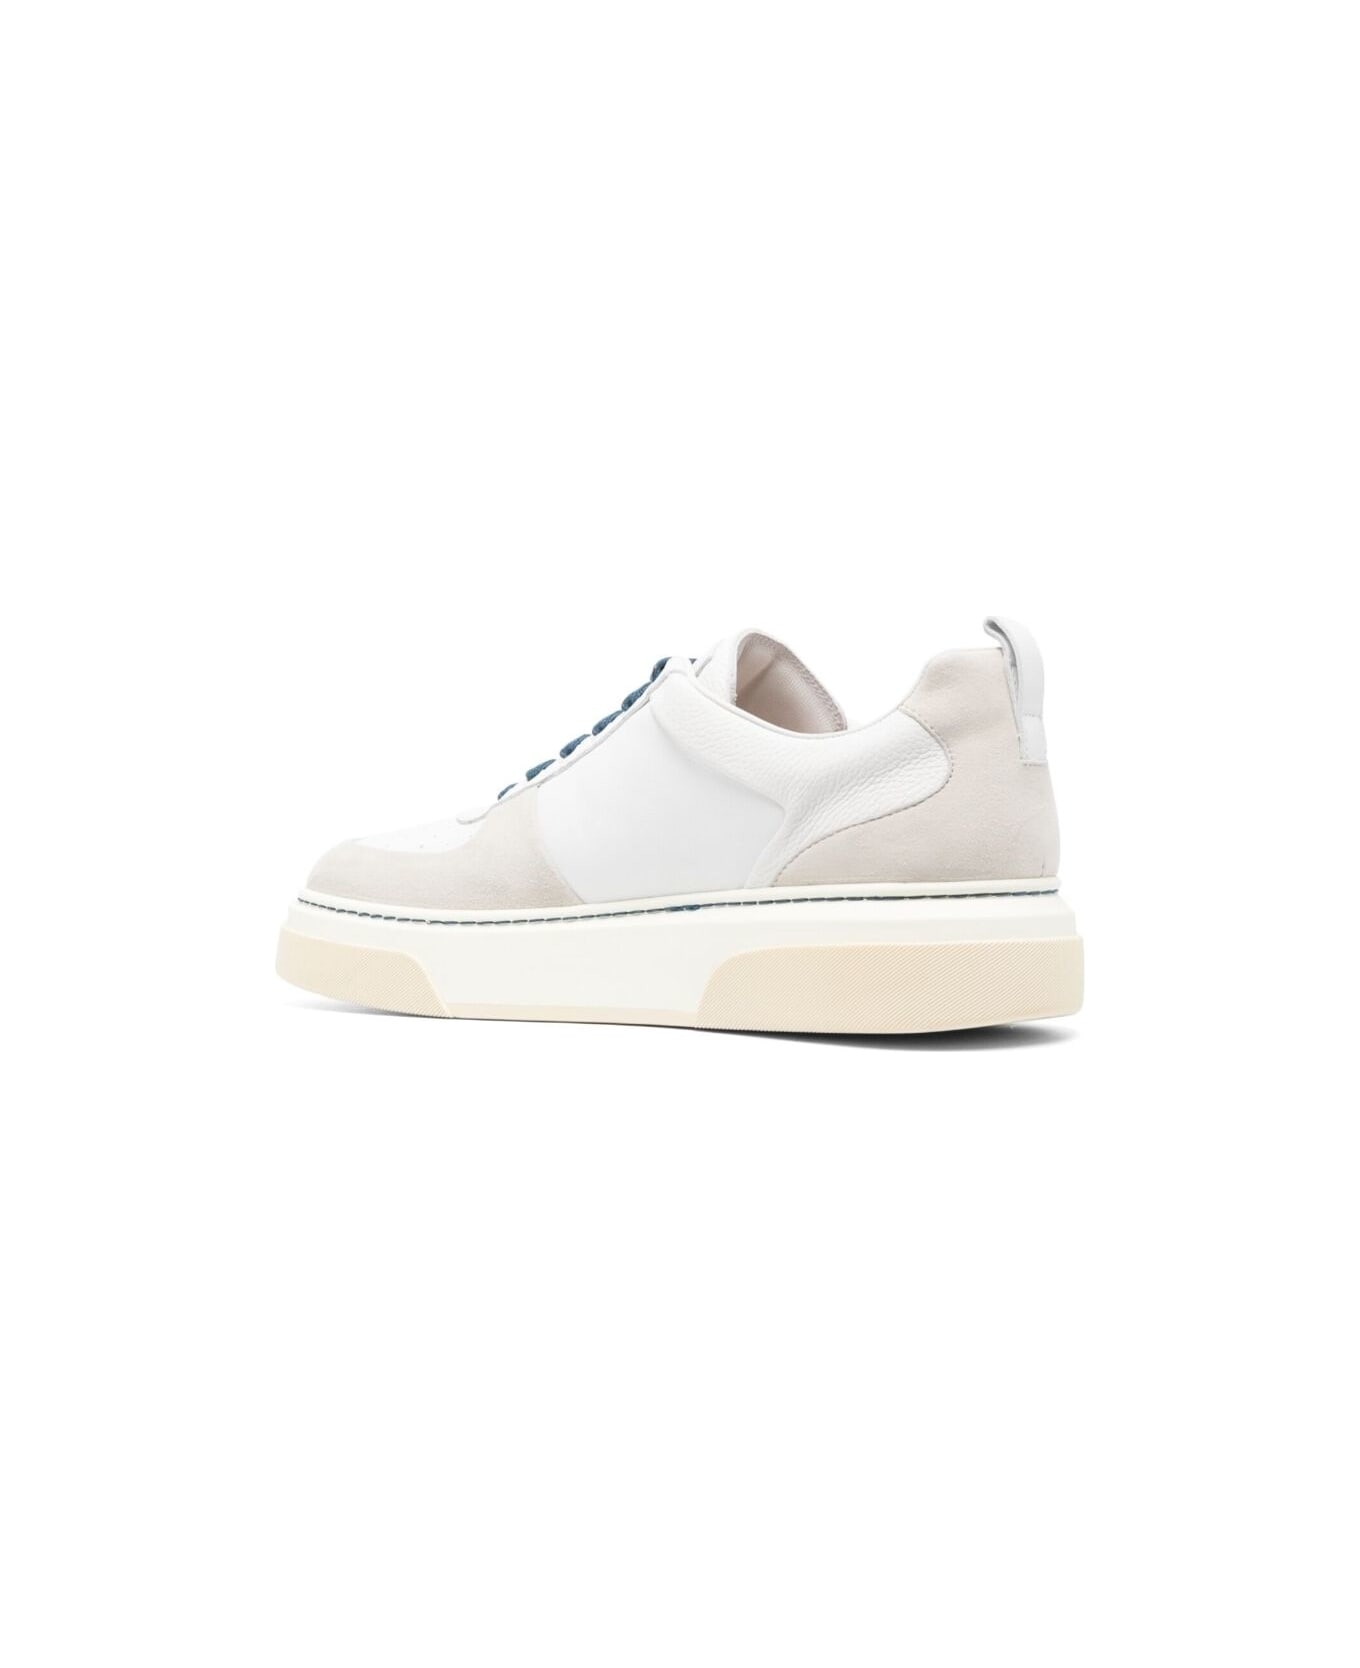 Ferragamo 'cassina' Beige Low Top Sneakers With Gancini And Suede Details In Leather Man - White